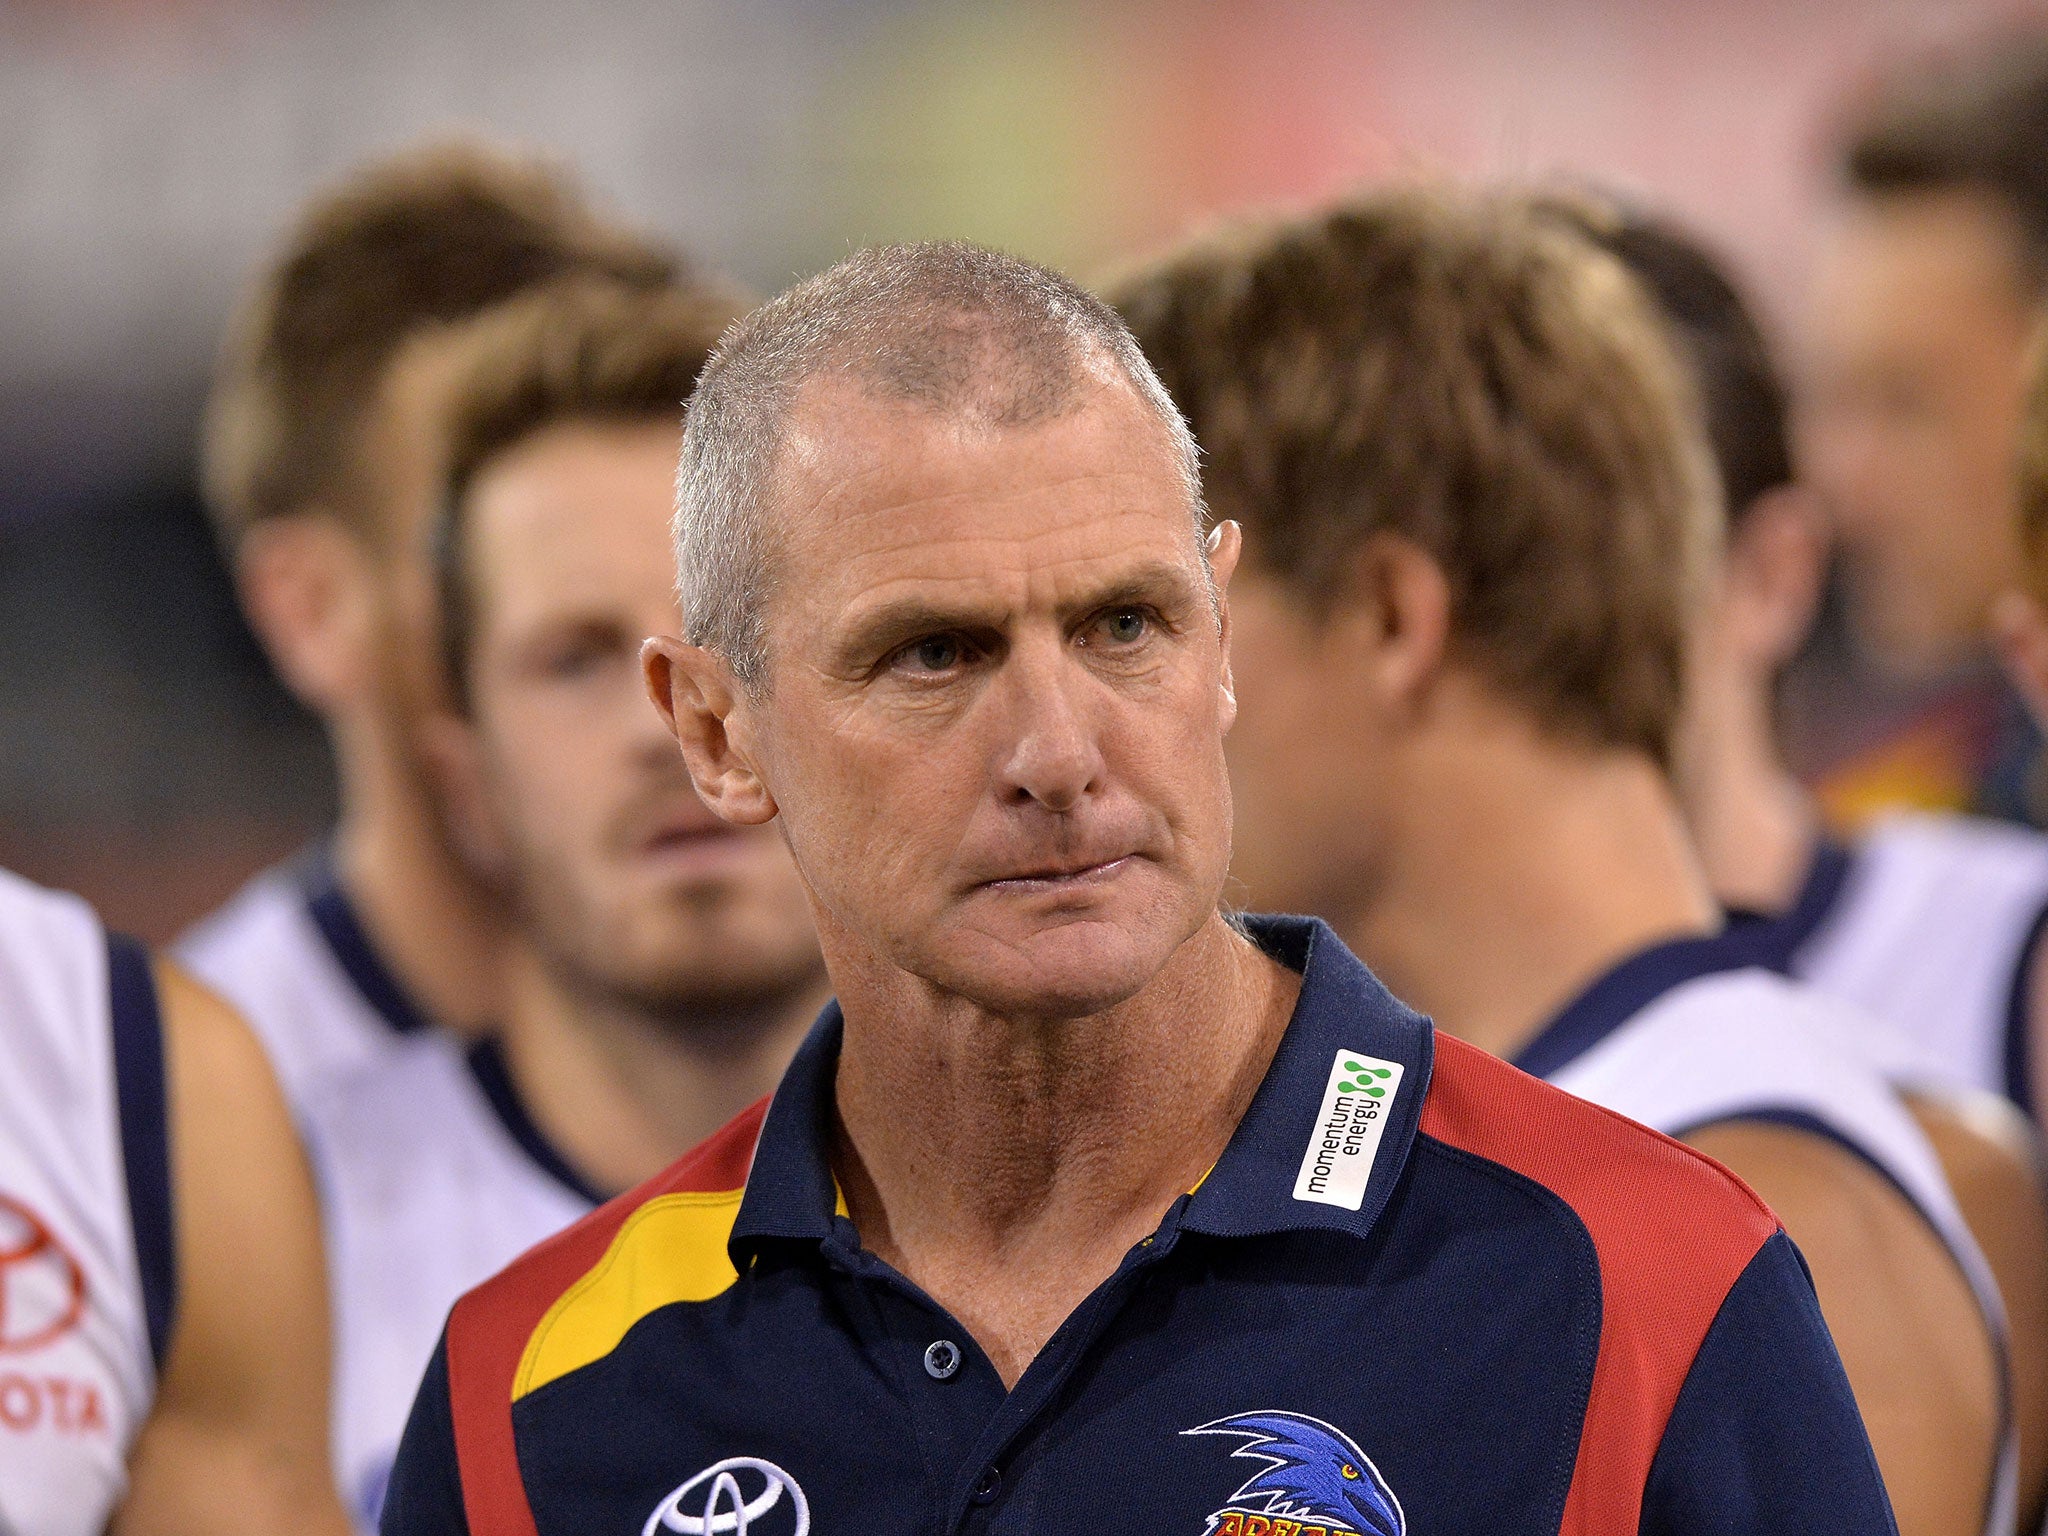 Phil Walsh, former Adelaide Crows head coach, has died at the age of 55 after being stabbed to death